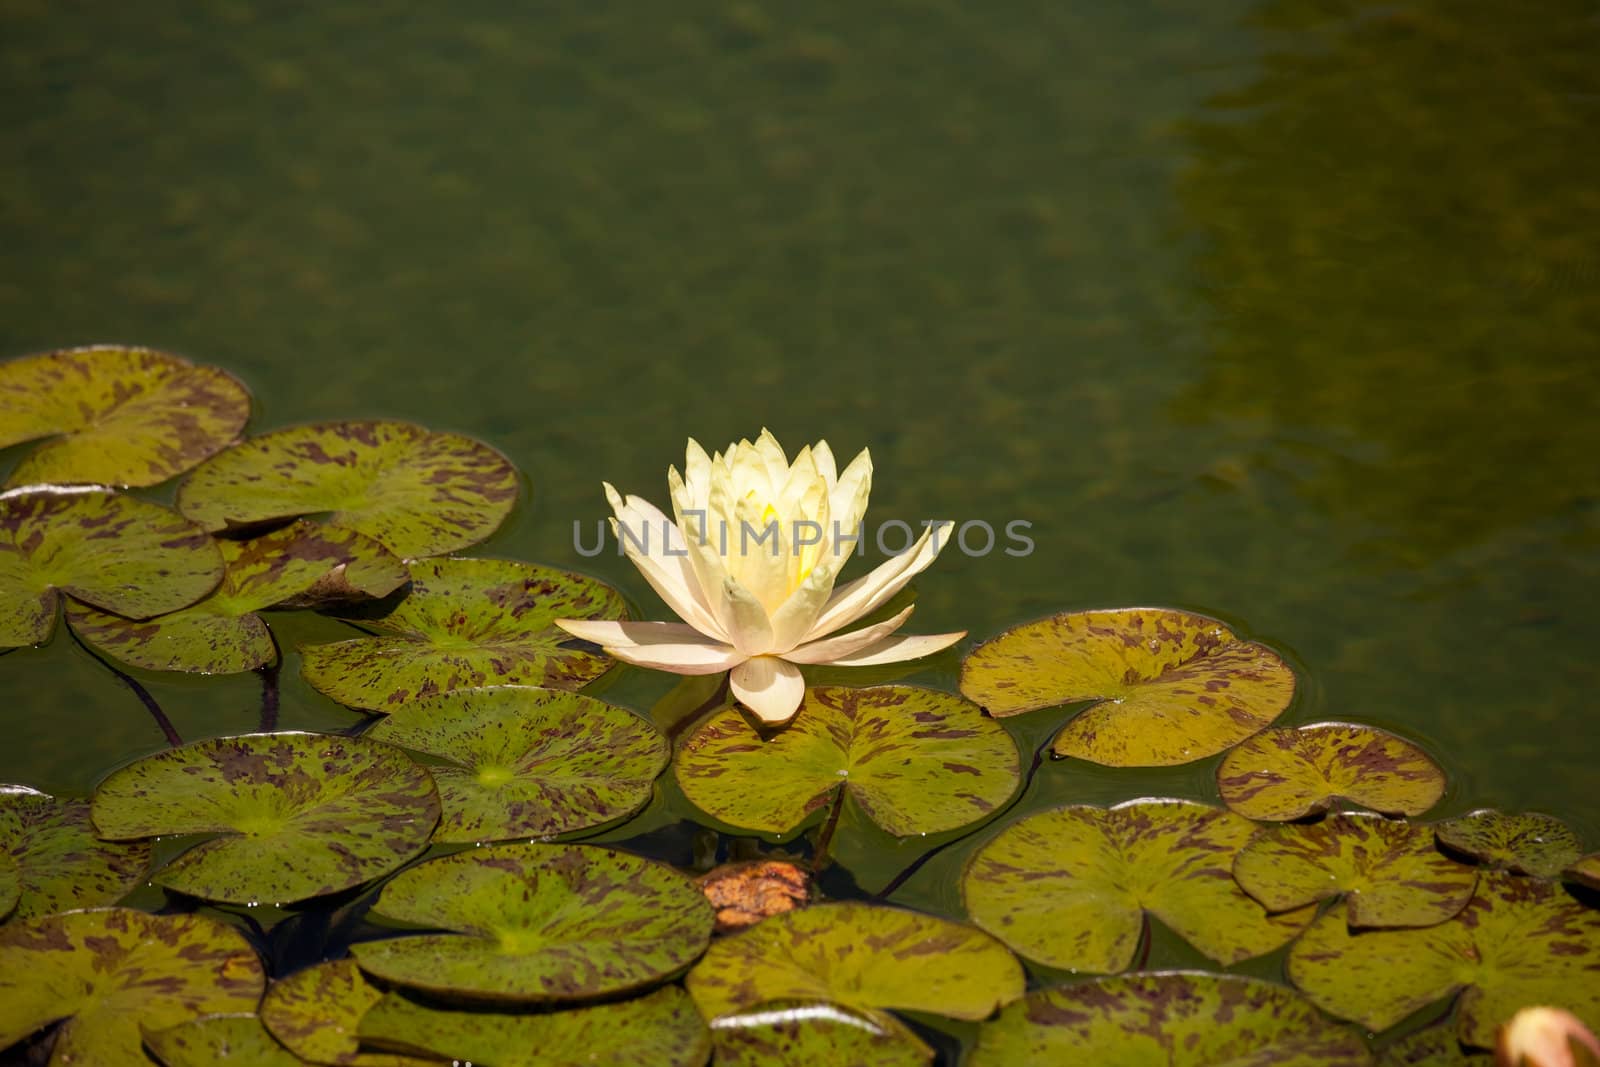 Water lily on edge of leaves by steheap